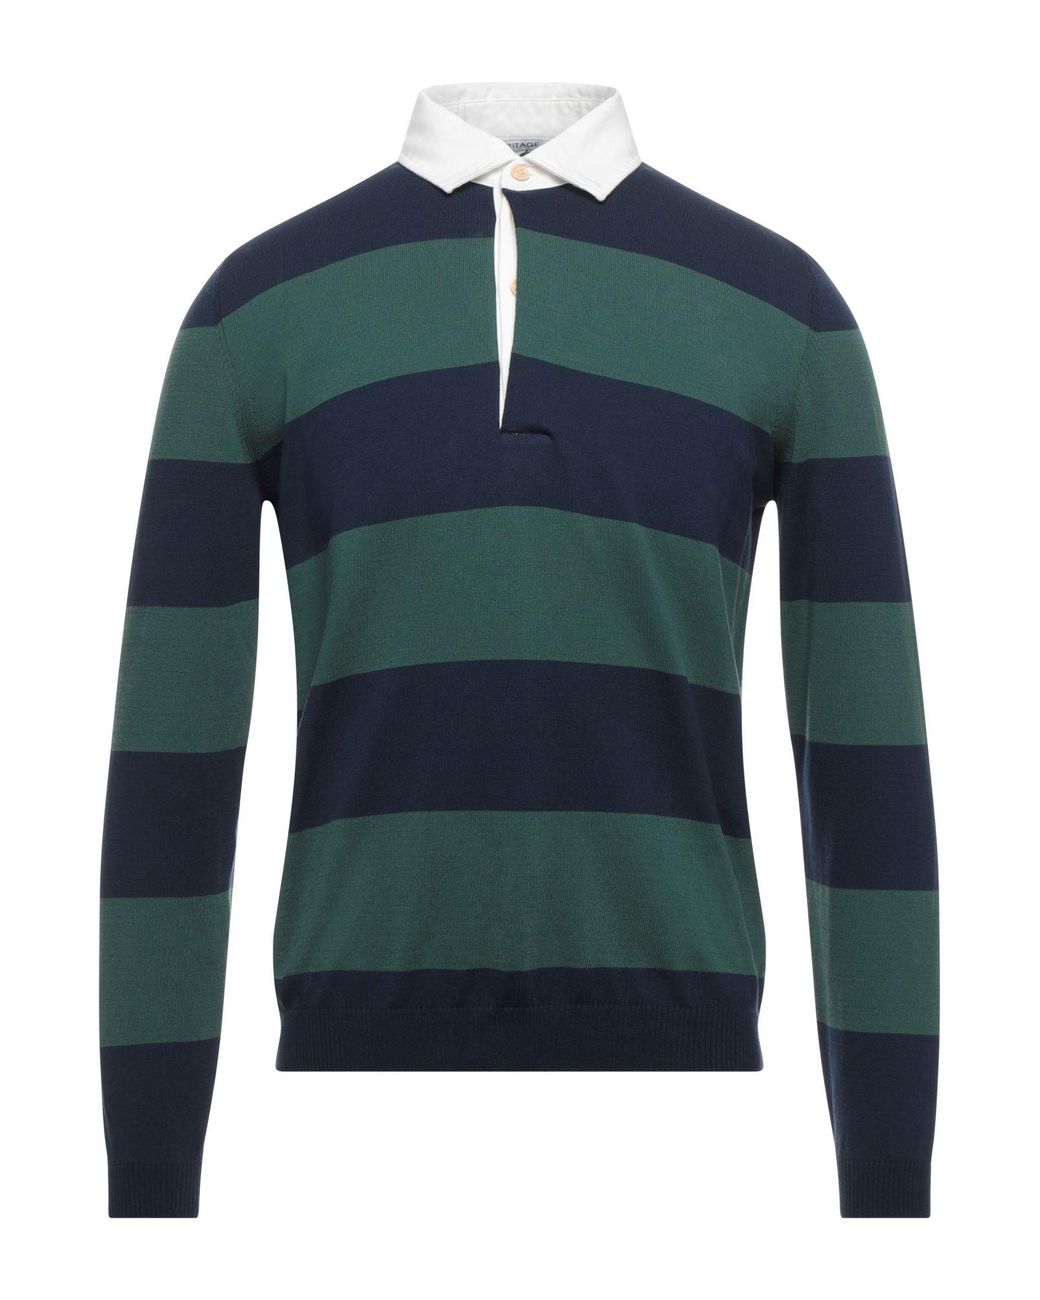 Heritage Cotton Sweater in Green for Men - Lyst